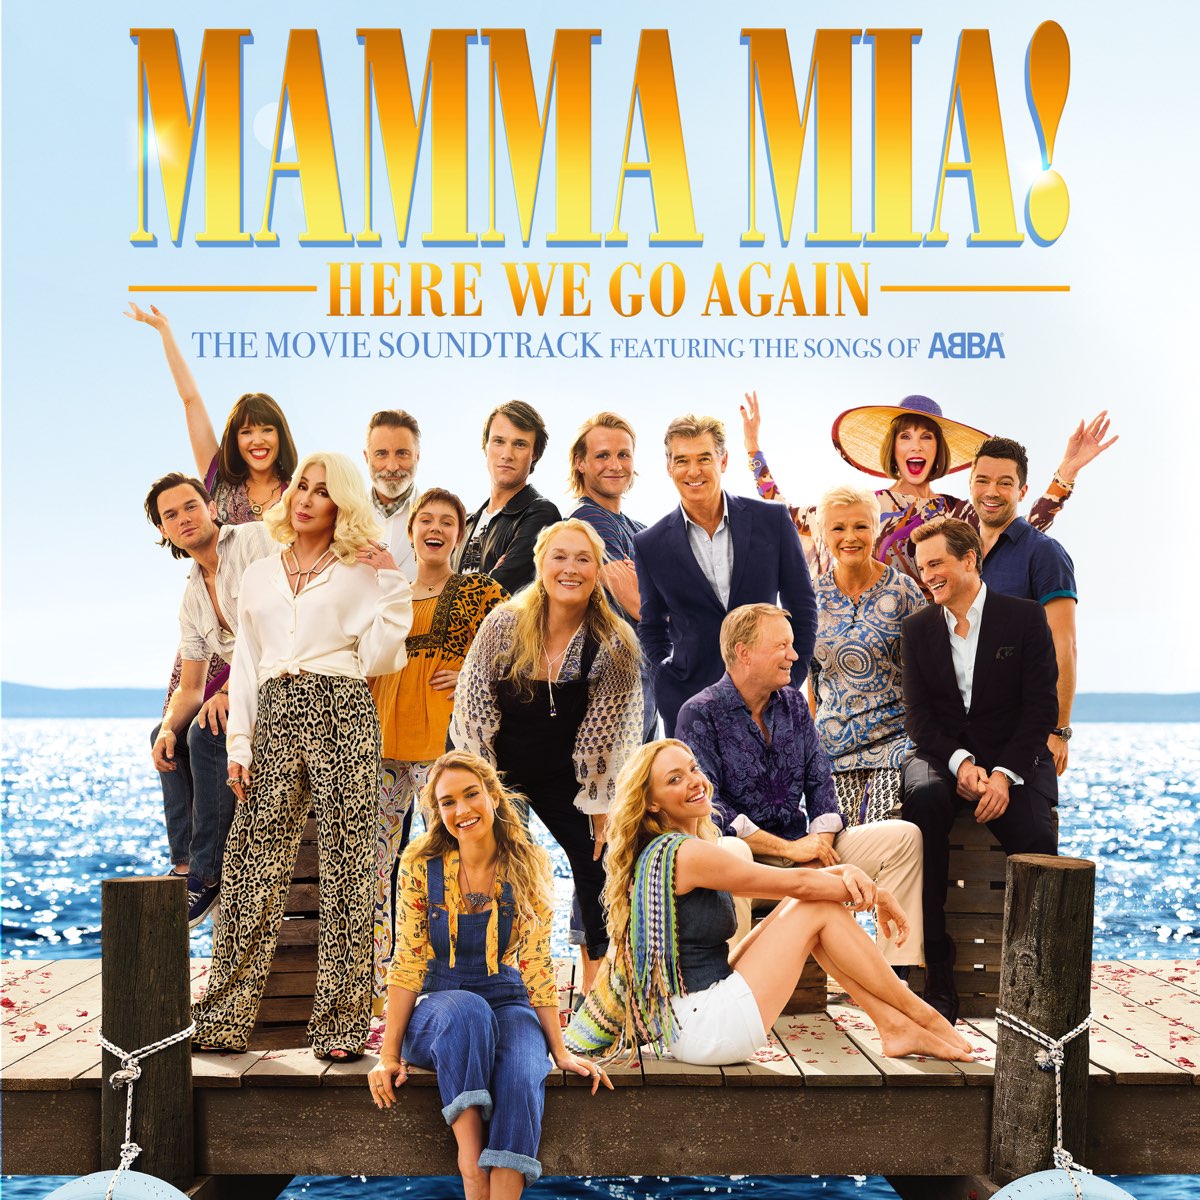 Mamma Mia! Here We Go Again (The Movie Soundtrack feat. the Songs of ABBA)  by Benny Andersson, Björn Ulvaeus & Lily James on Apple Music